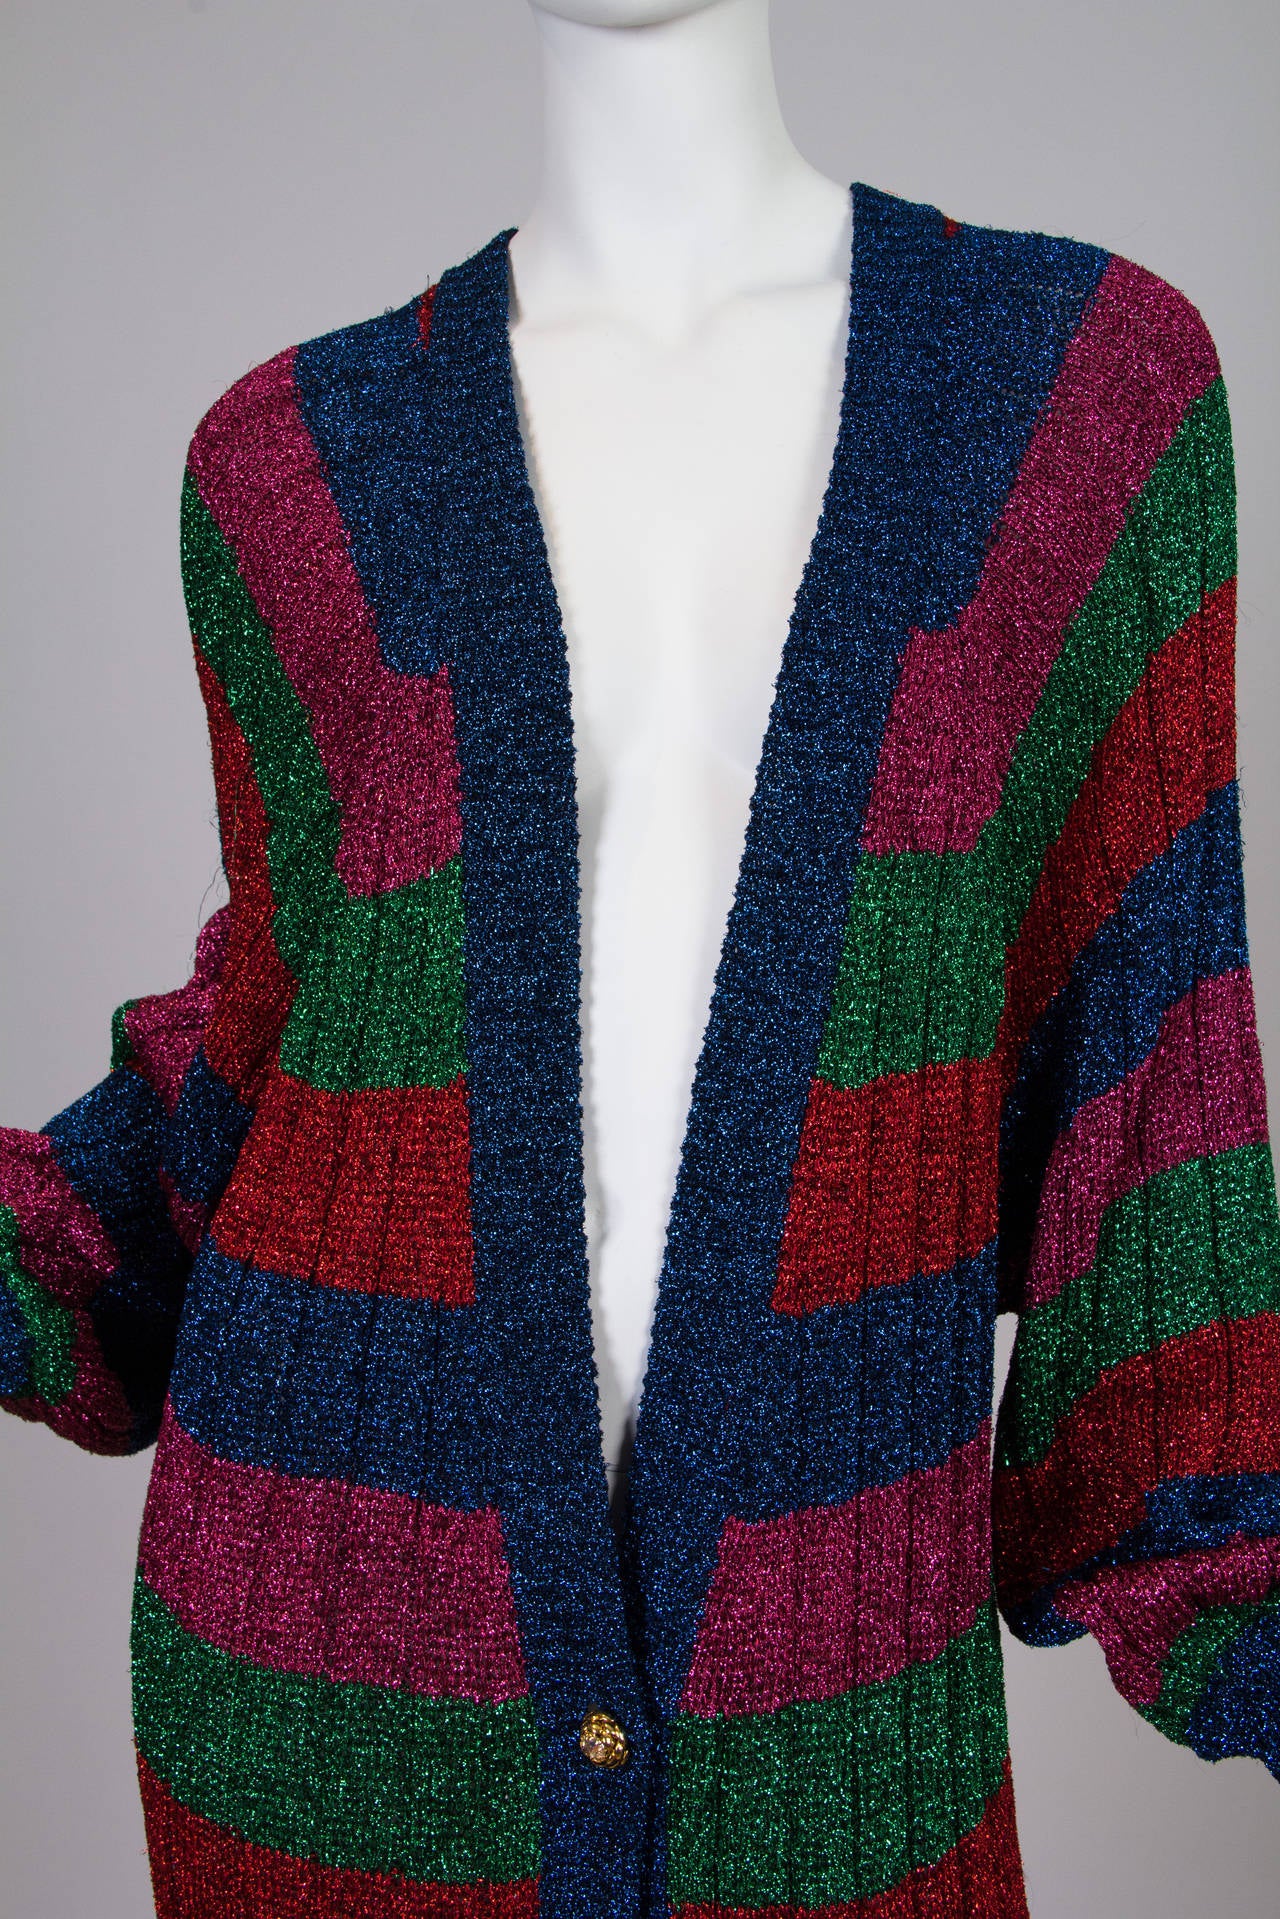 1970s Maxi Lurex Sweater from Harriet Selling for Henri Bendel 4